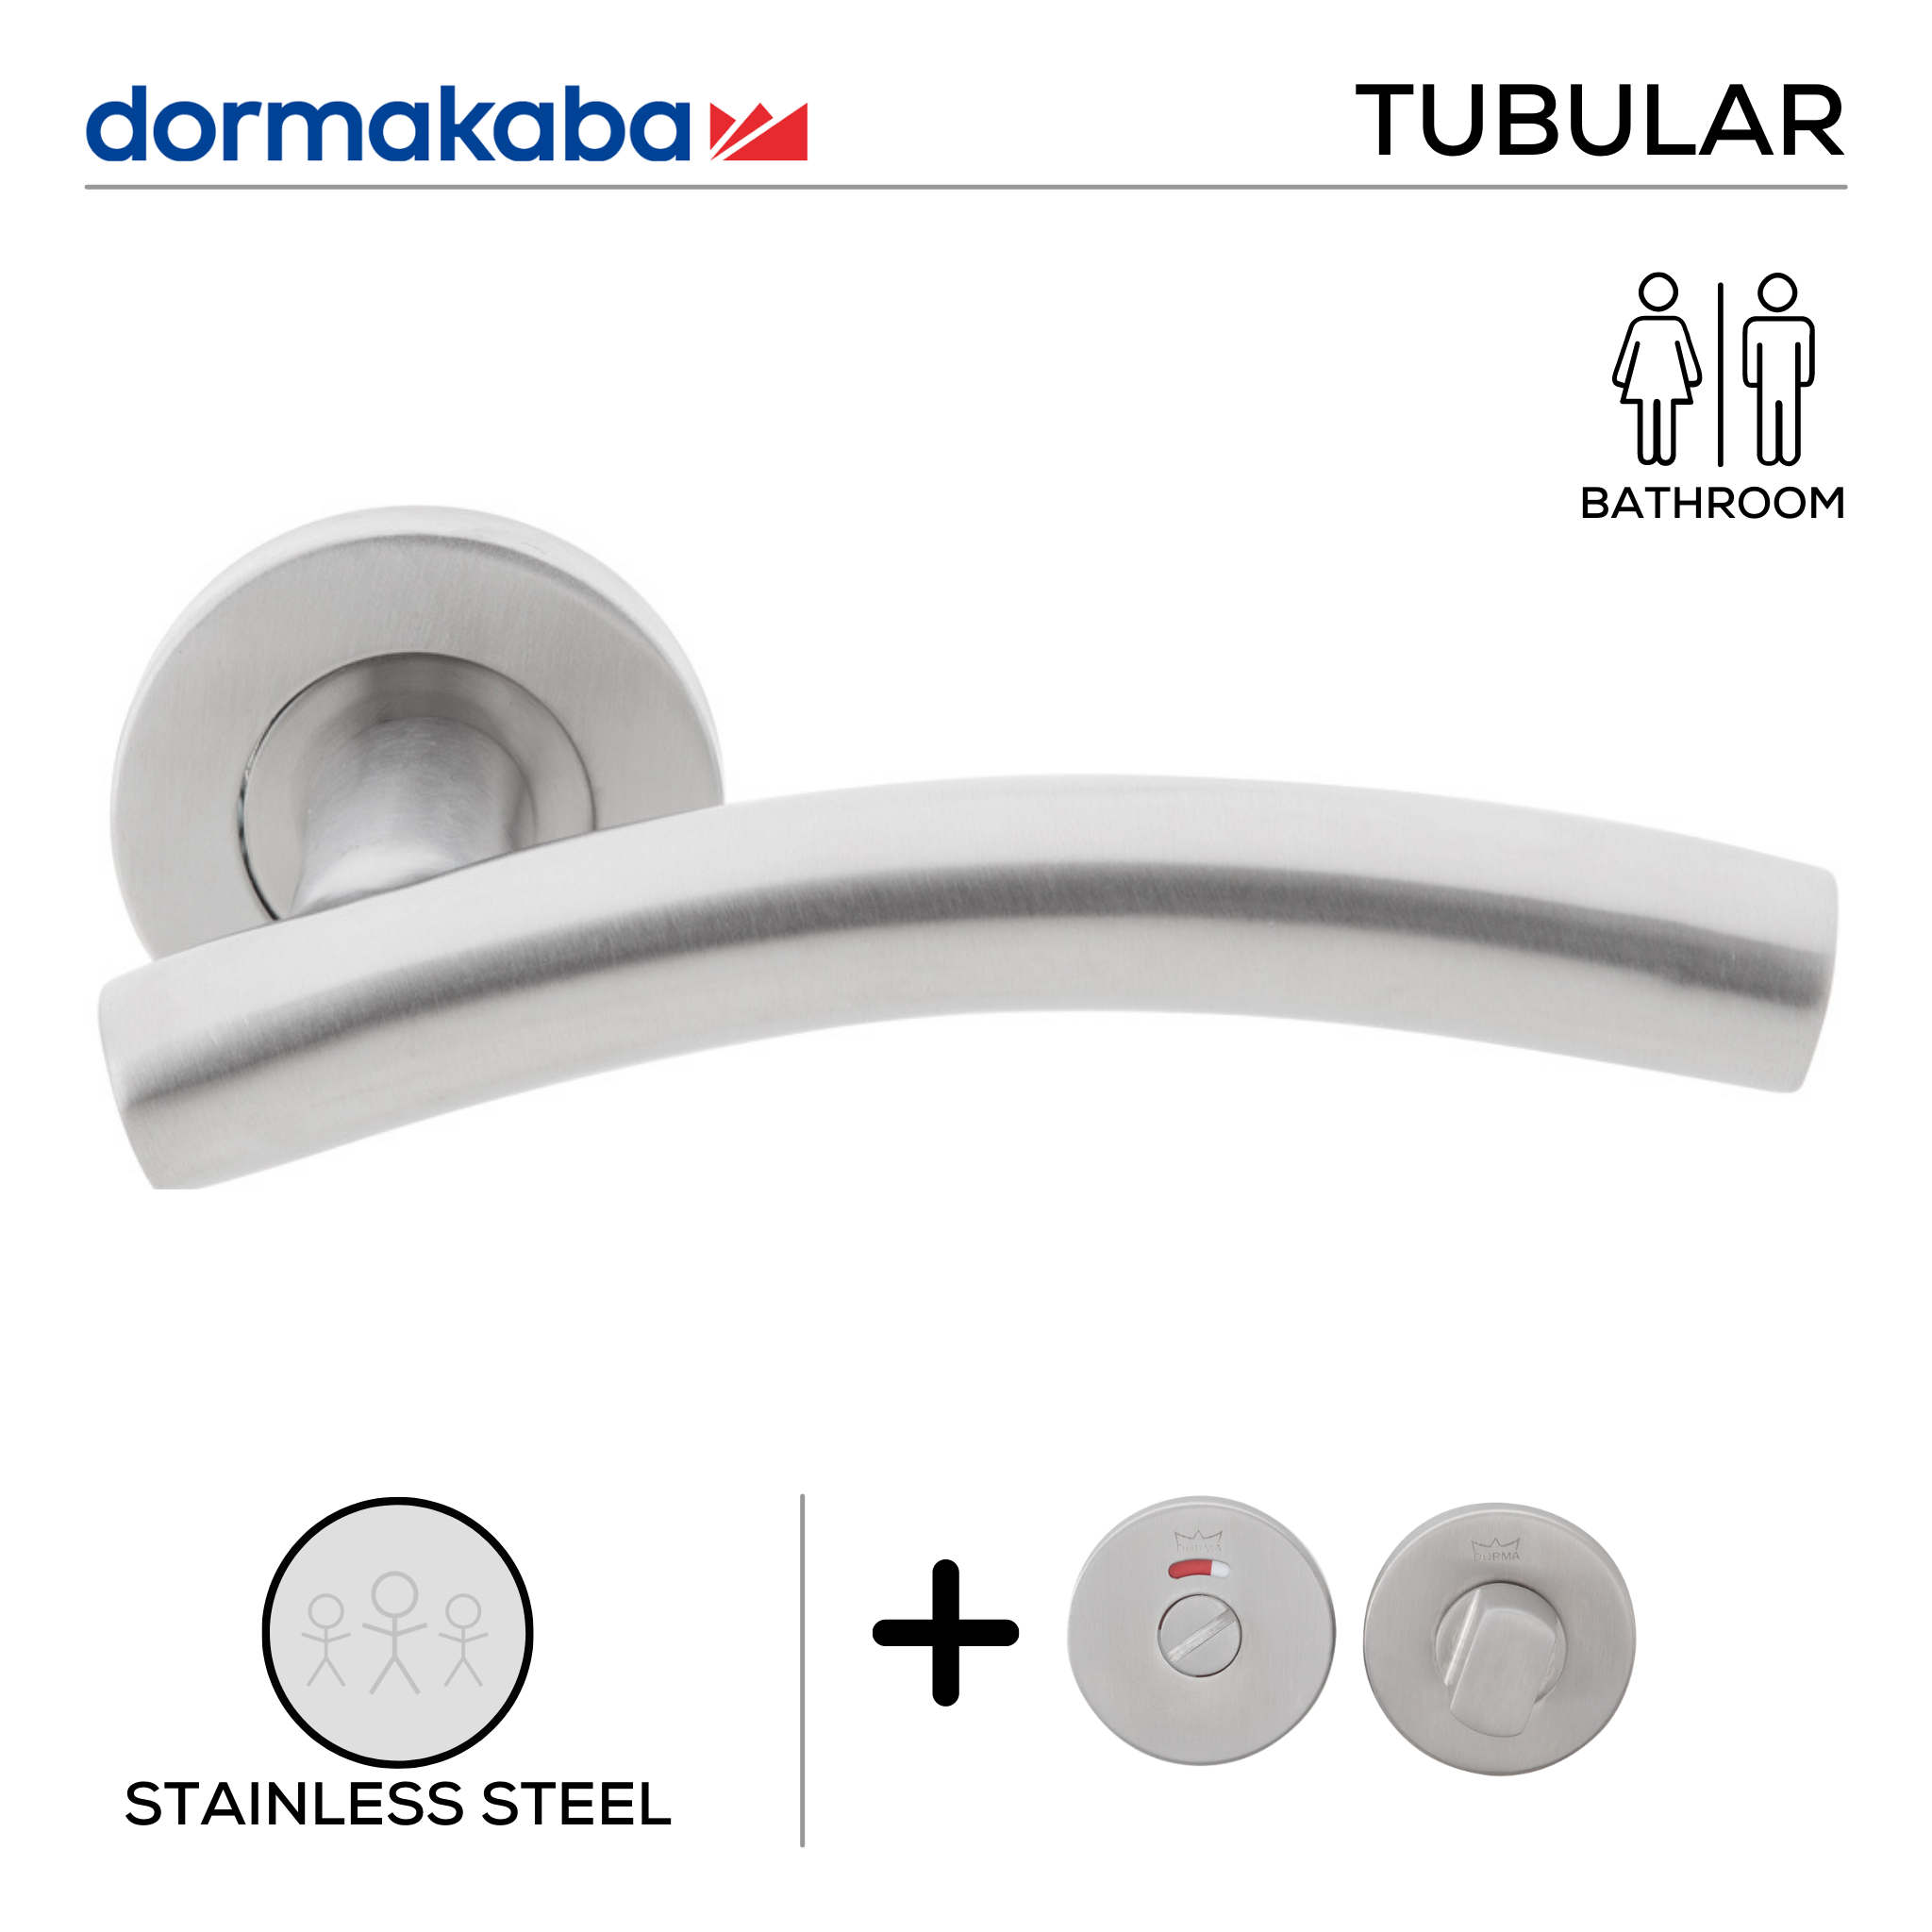 TH 121 Bathroom W/C, Lever Handles, Tubular, On Round Rose, With Bathroom (WC) Indicator Set - DWC 005, 137mm (l), Stainless Steel, DORMAKABA